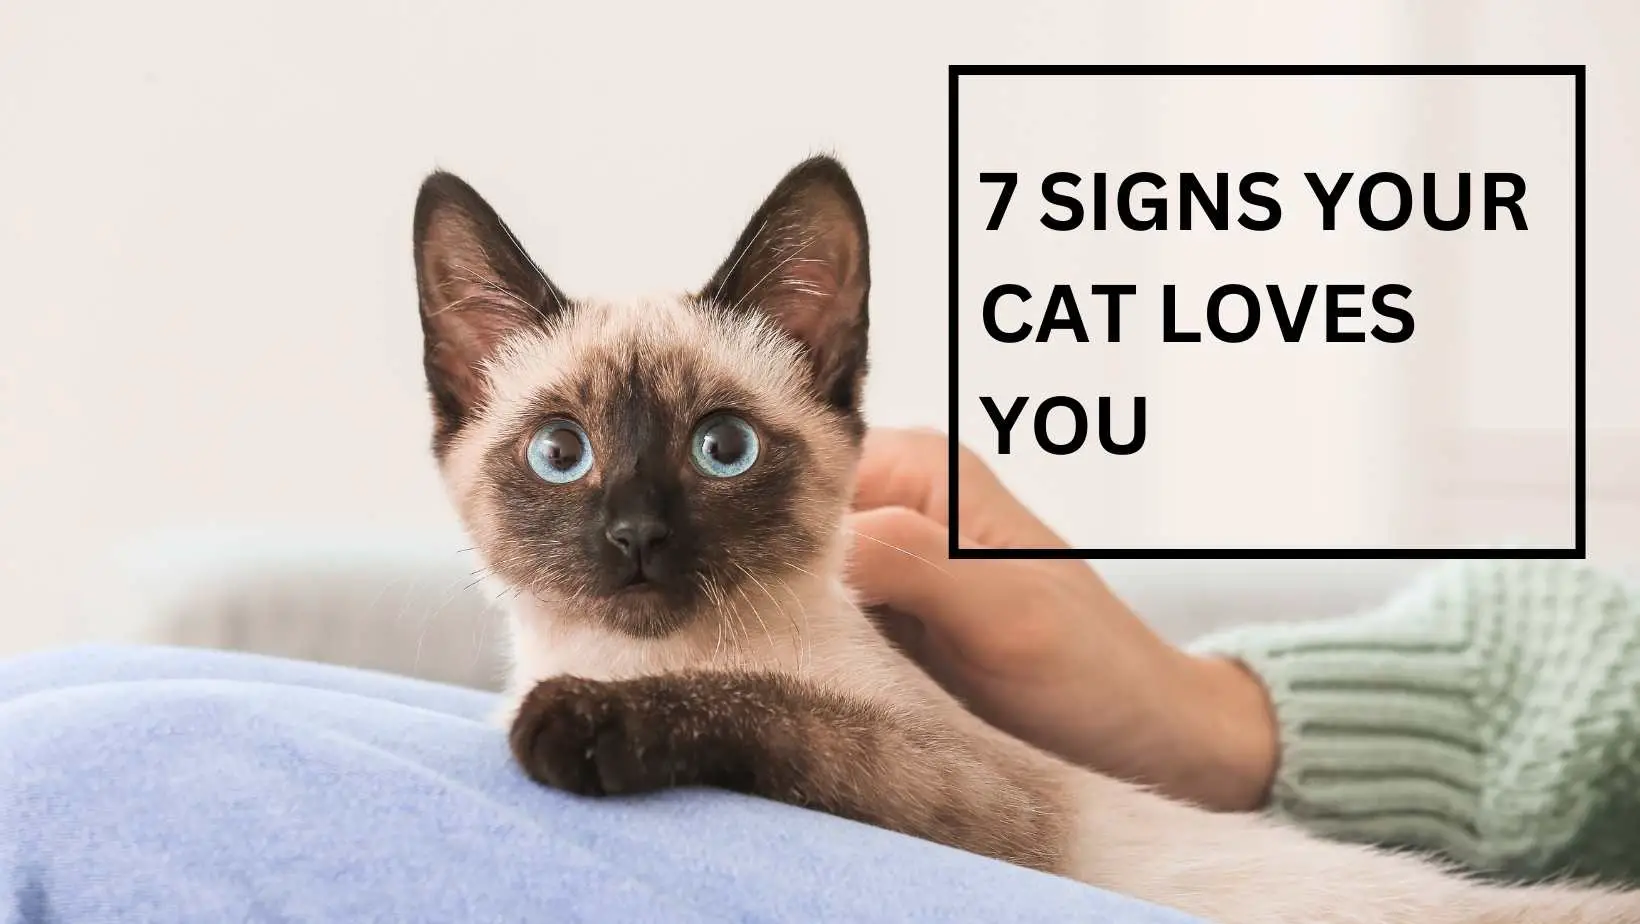 7 Signs Your Cat Loves You